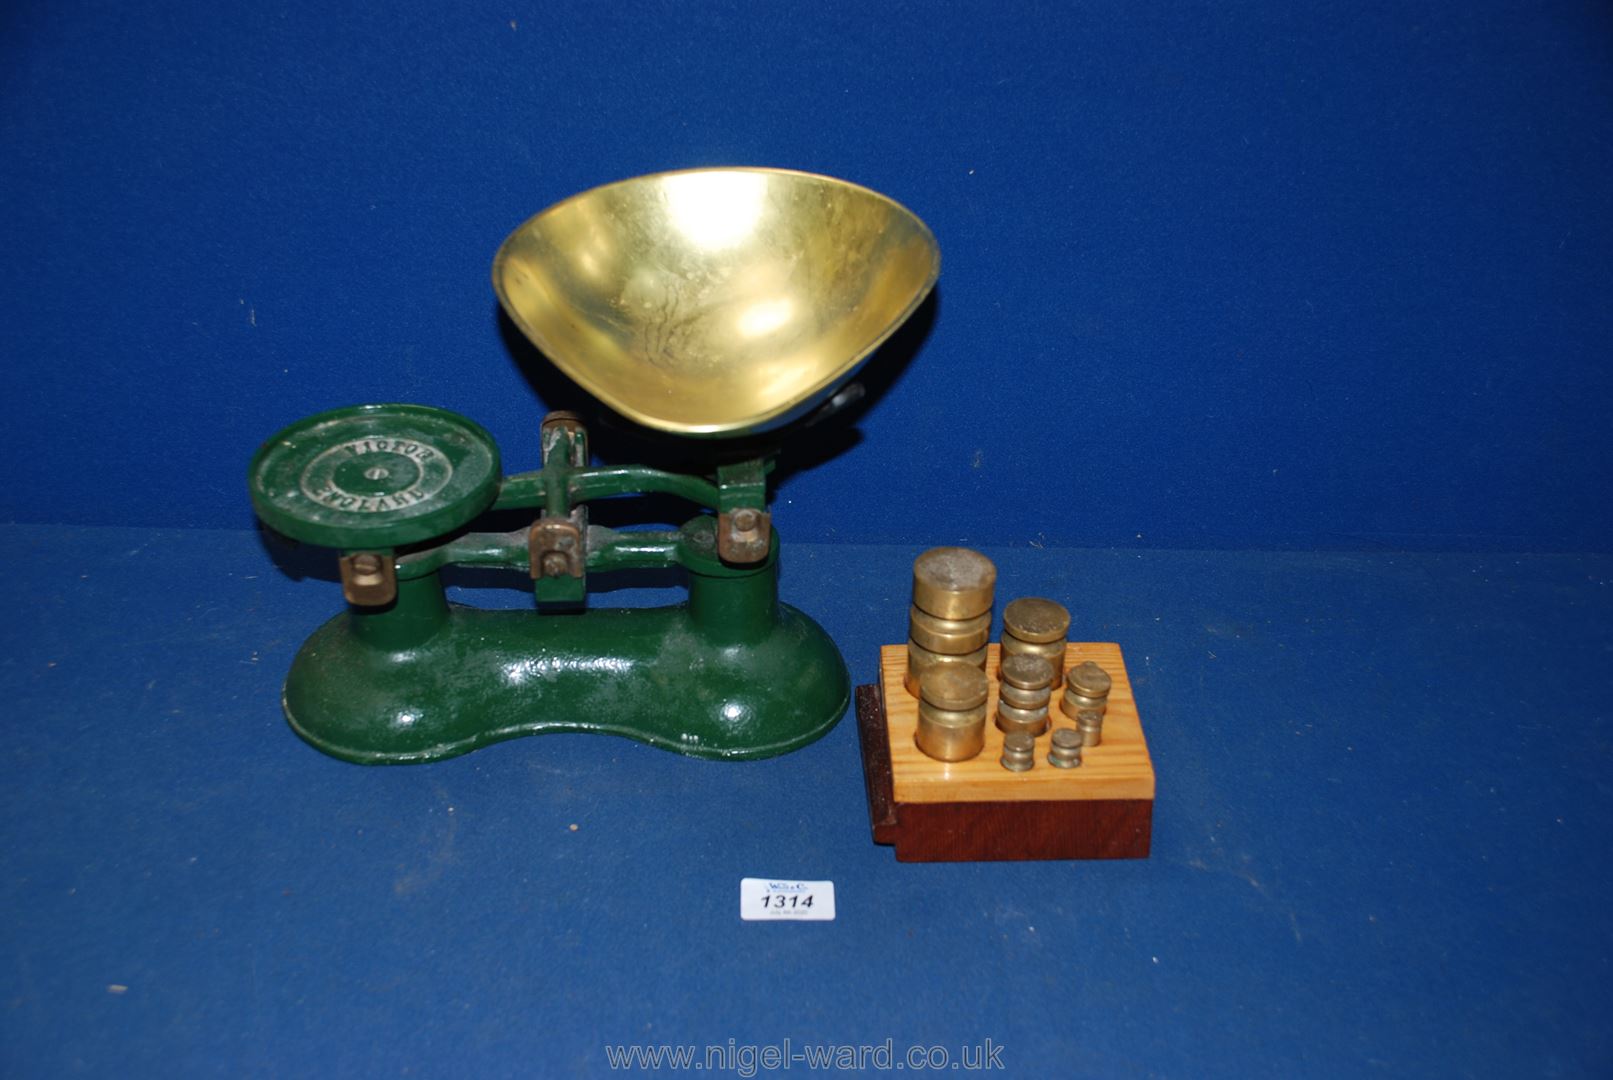 A pair of Victor weighing scales and box set of weights.